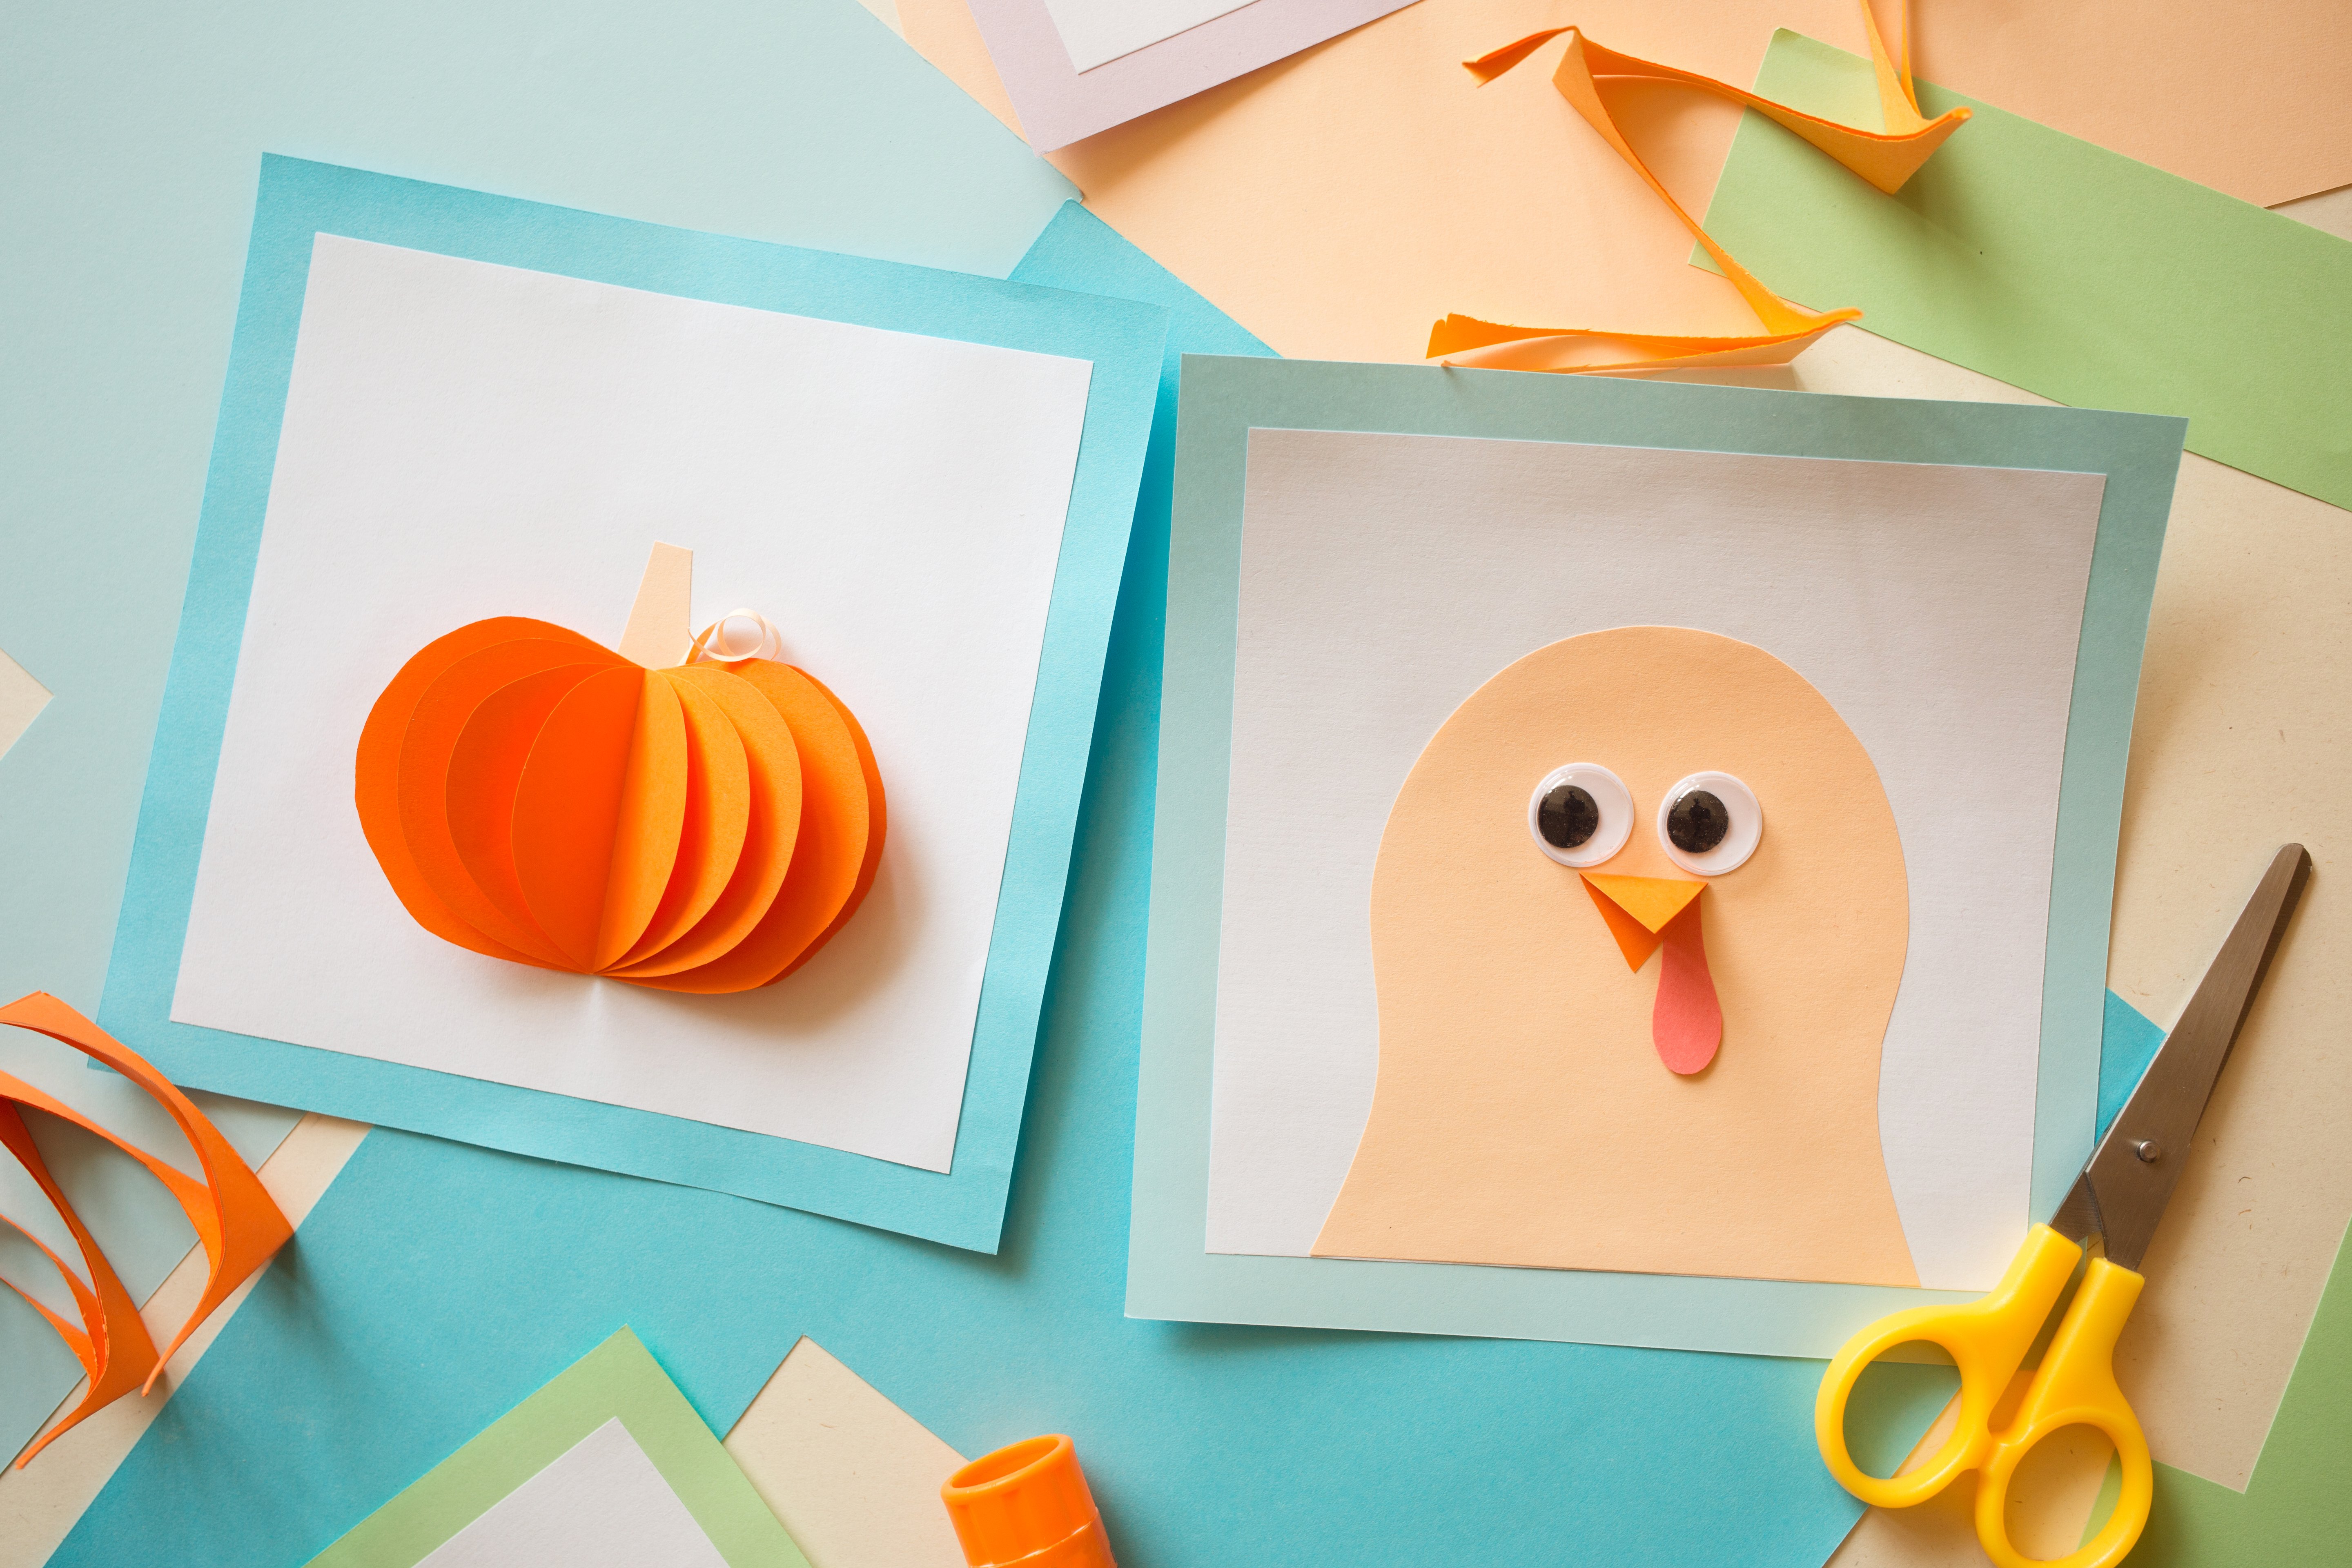 paper-craft-for-kids-for-thanksgiving-day-2022-08-11-15-52-32-utc